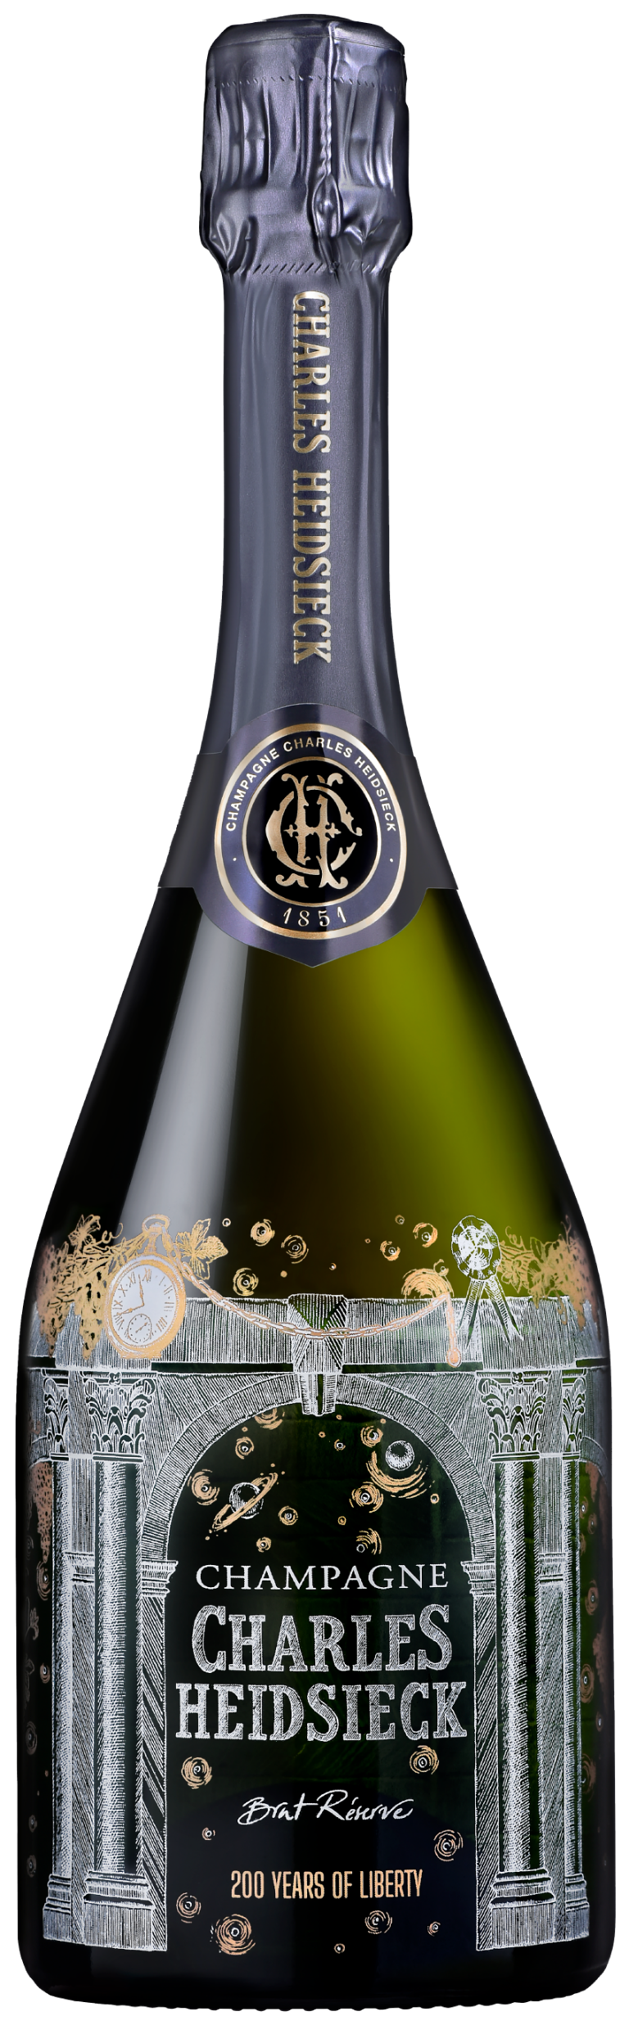 Charles Heidsieck Champagne Brut Reserve Collector Edition 200 Years of Liberty